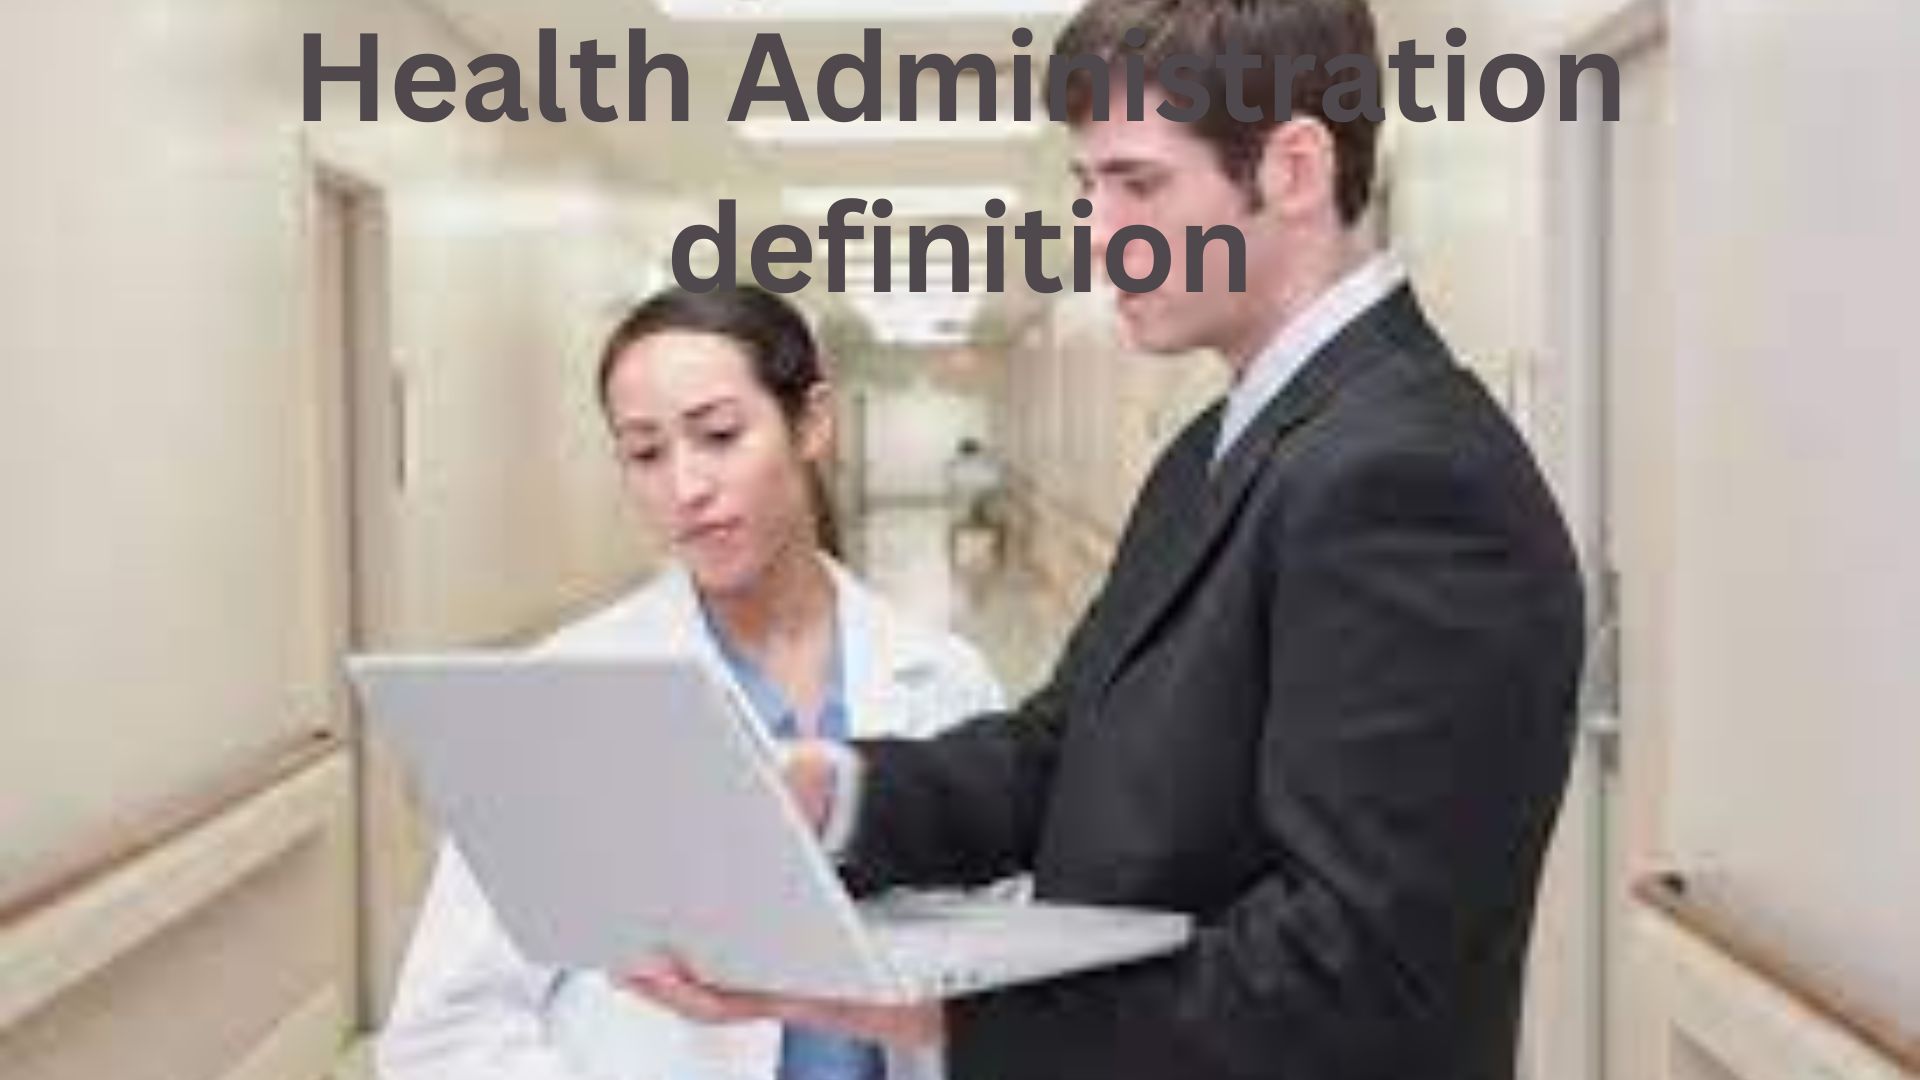 The Next 6 Things You Should Do For Health Administration Definition Success